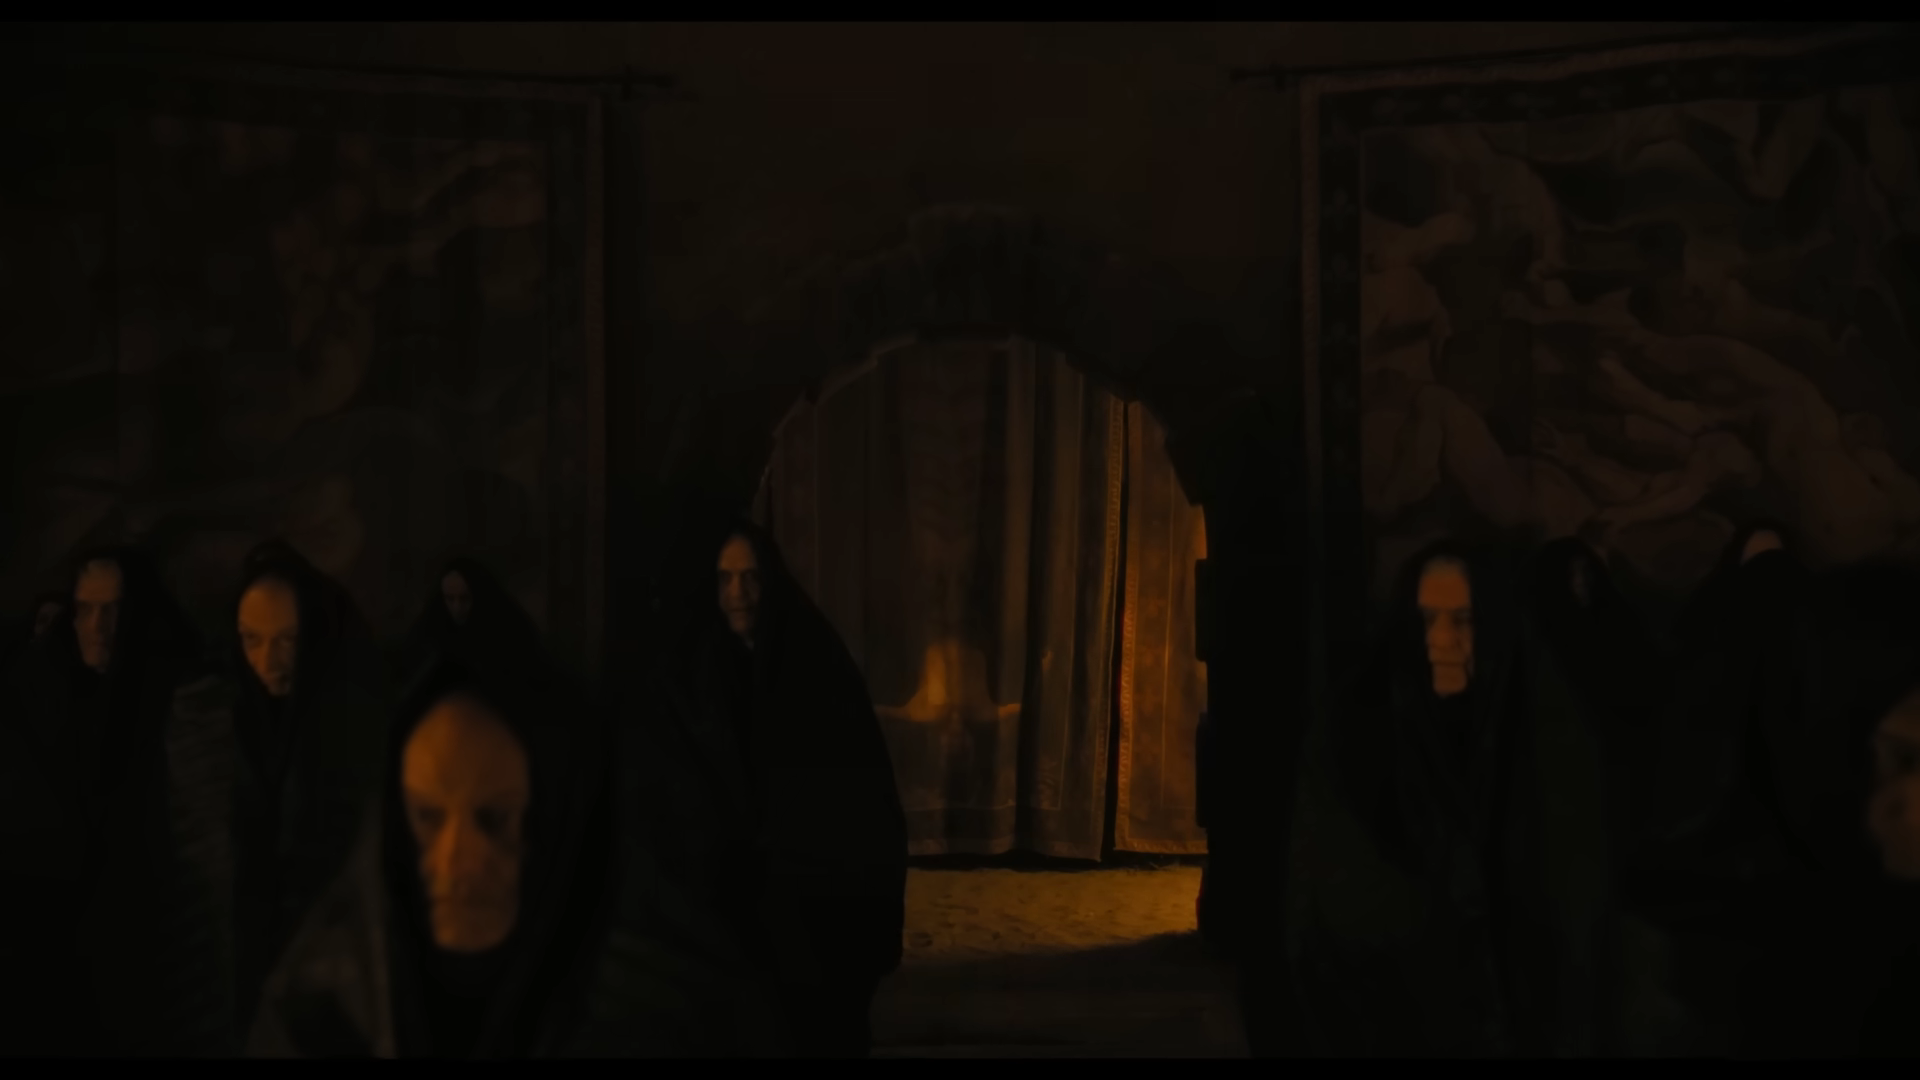 Dark room with people in cloaks standing solemnly by stone walls, tapestries in the background